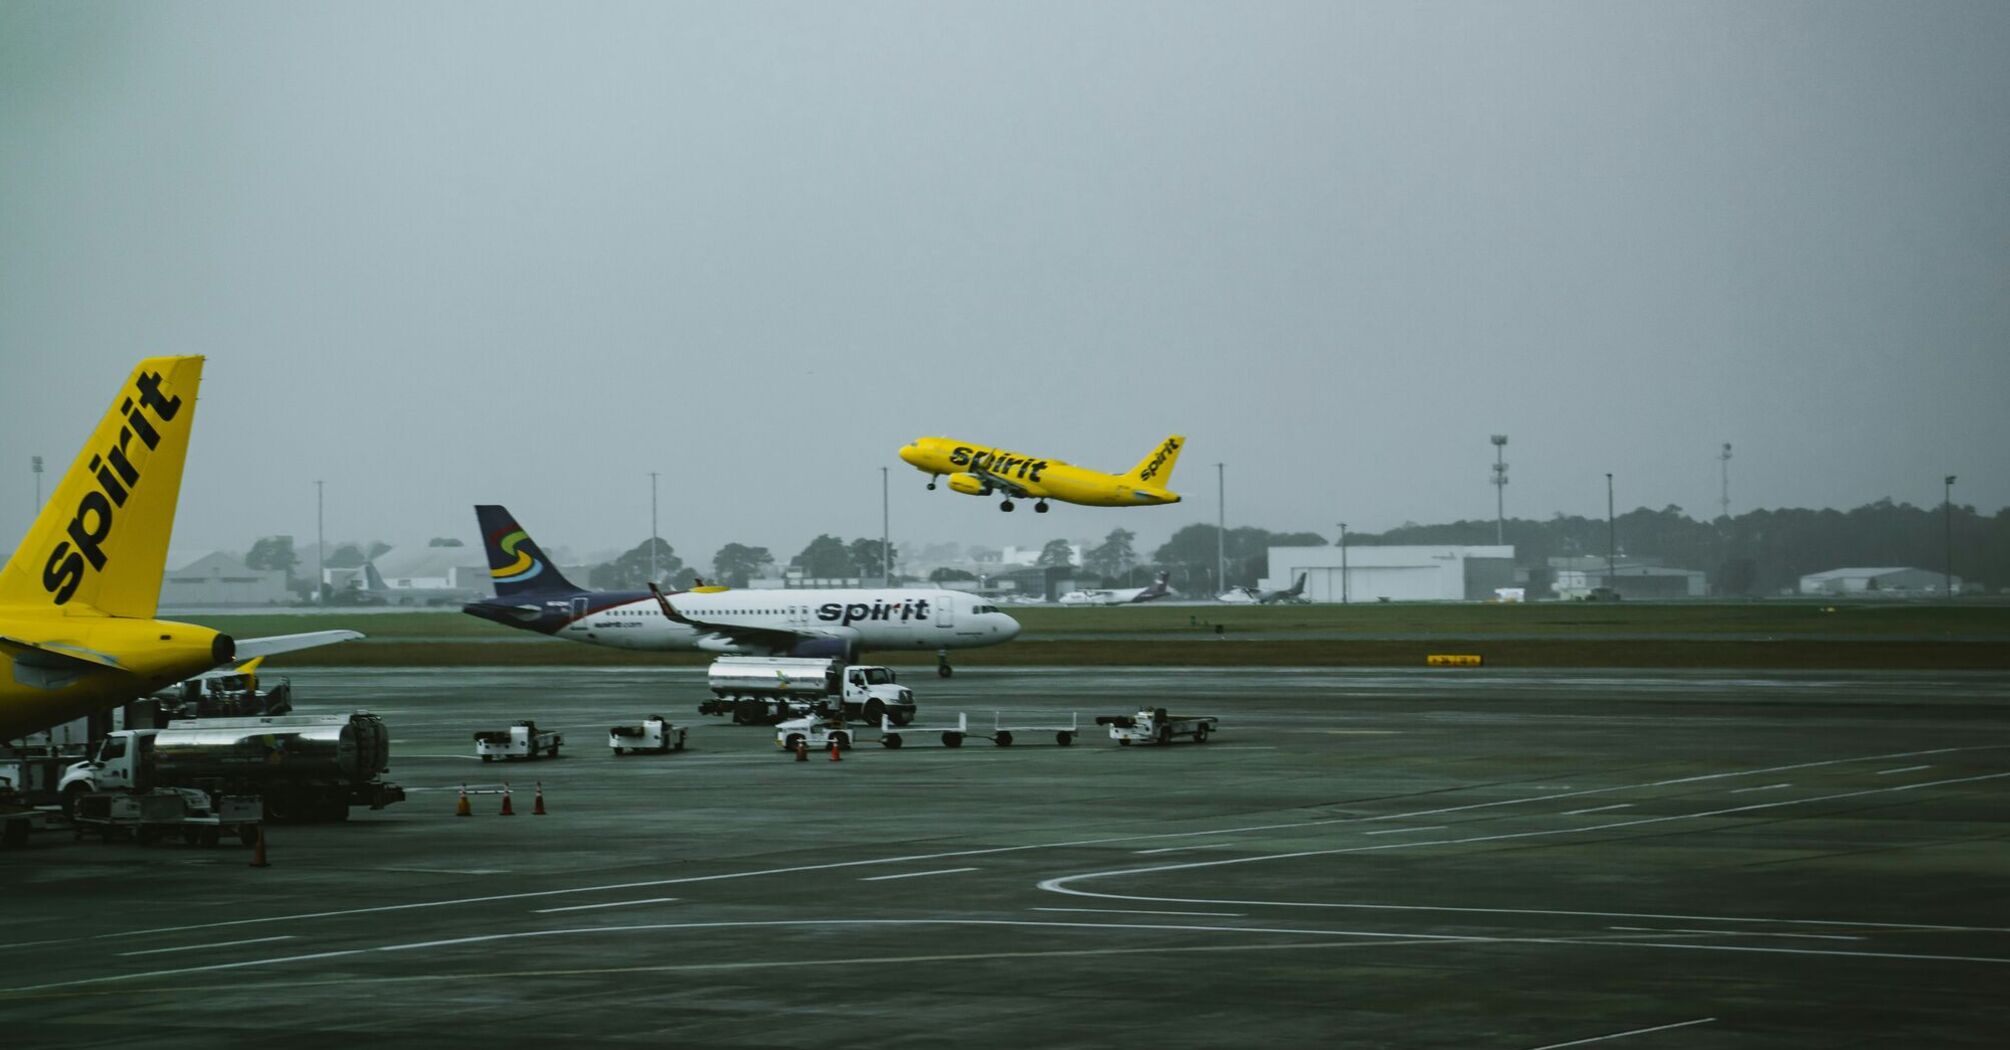 Spirit Airlines aircraft on the tarmac during a gloomy day, with one plane taking off in the background